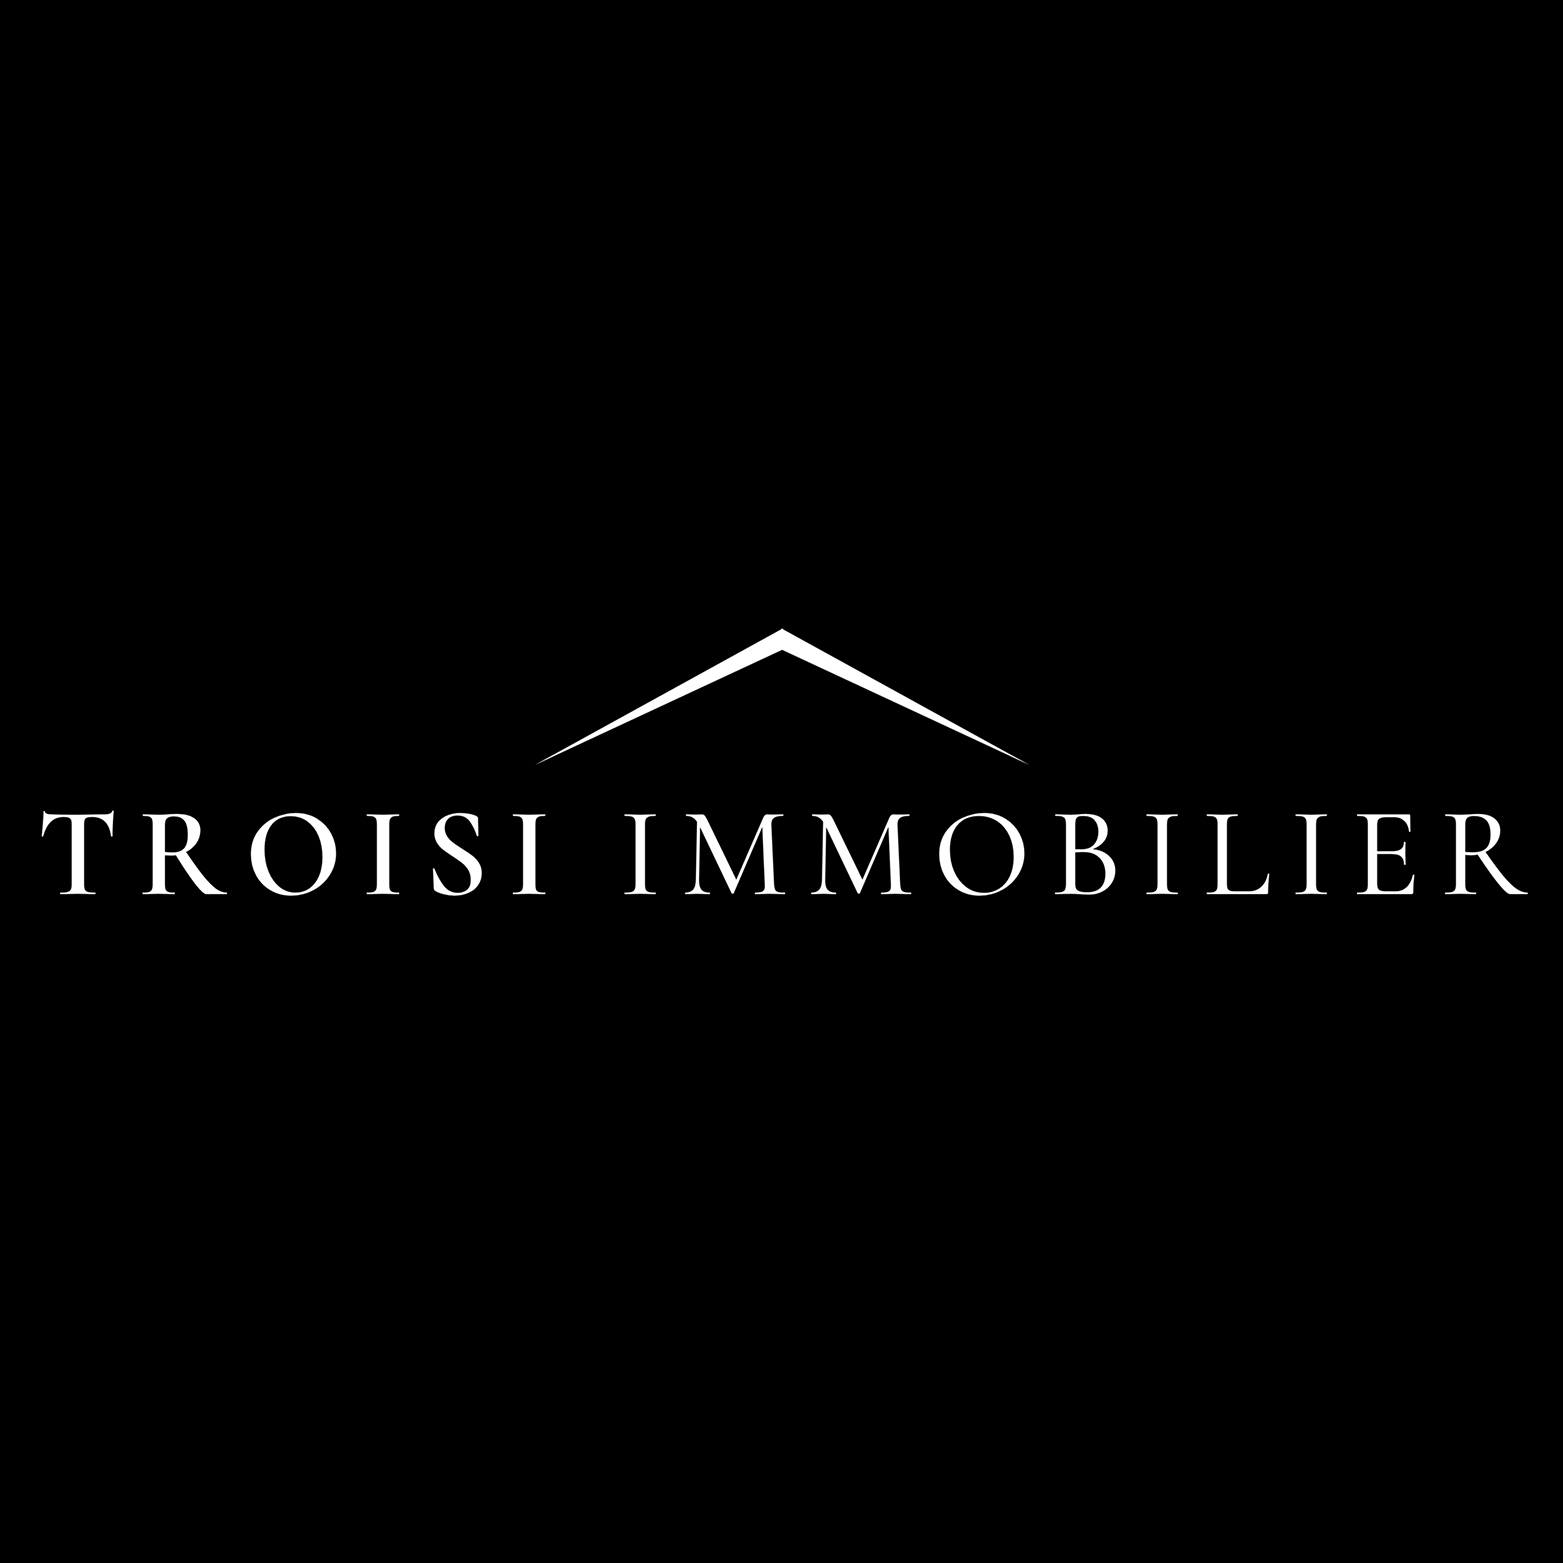 Troisi Immobilier